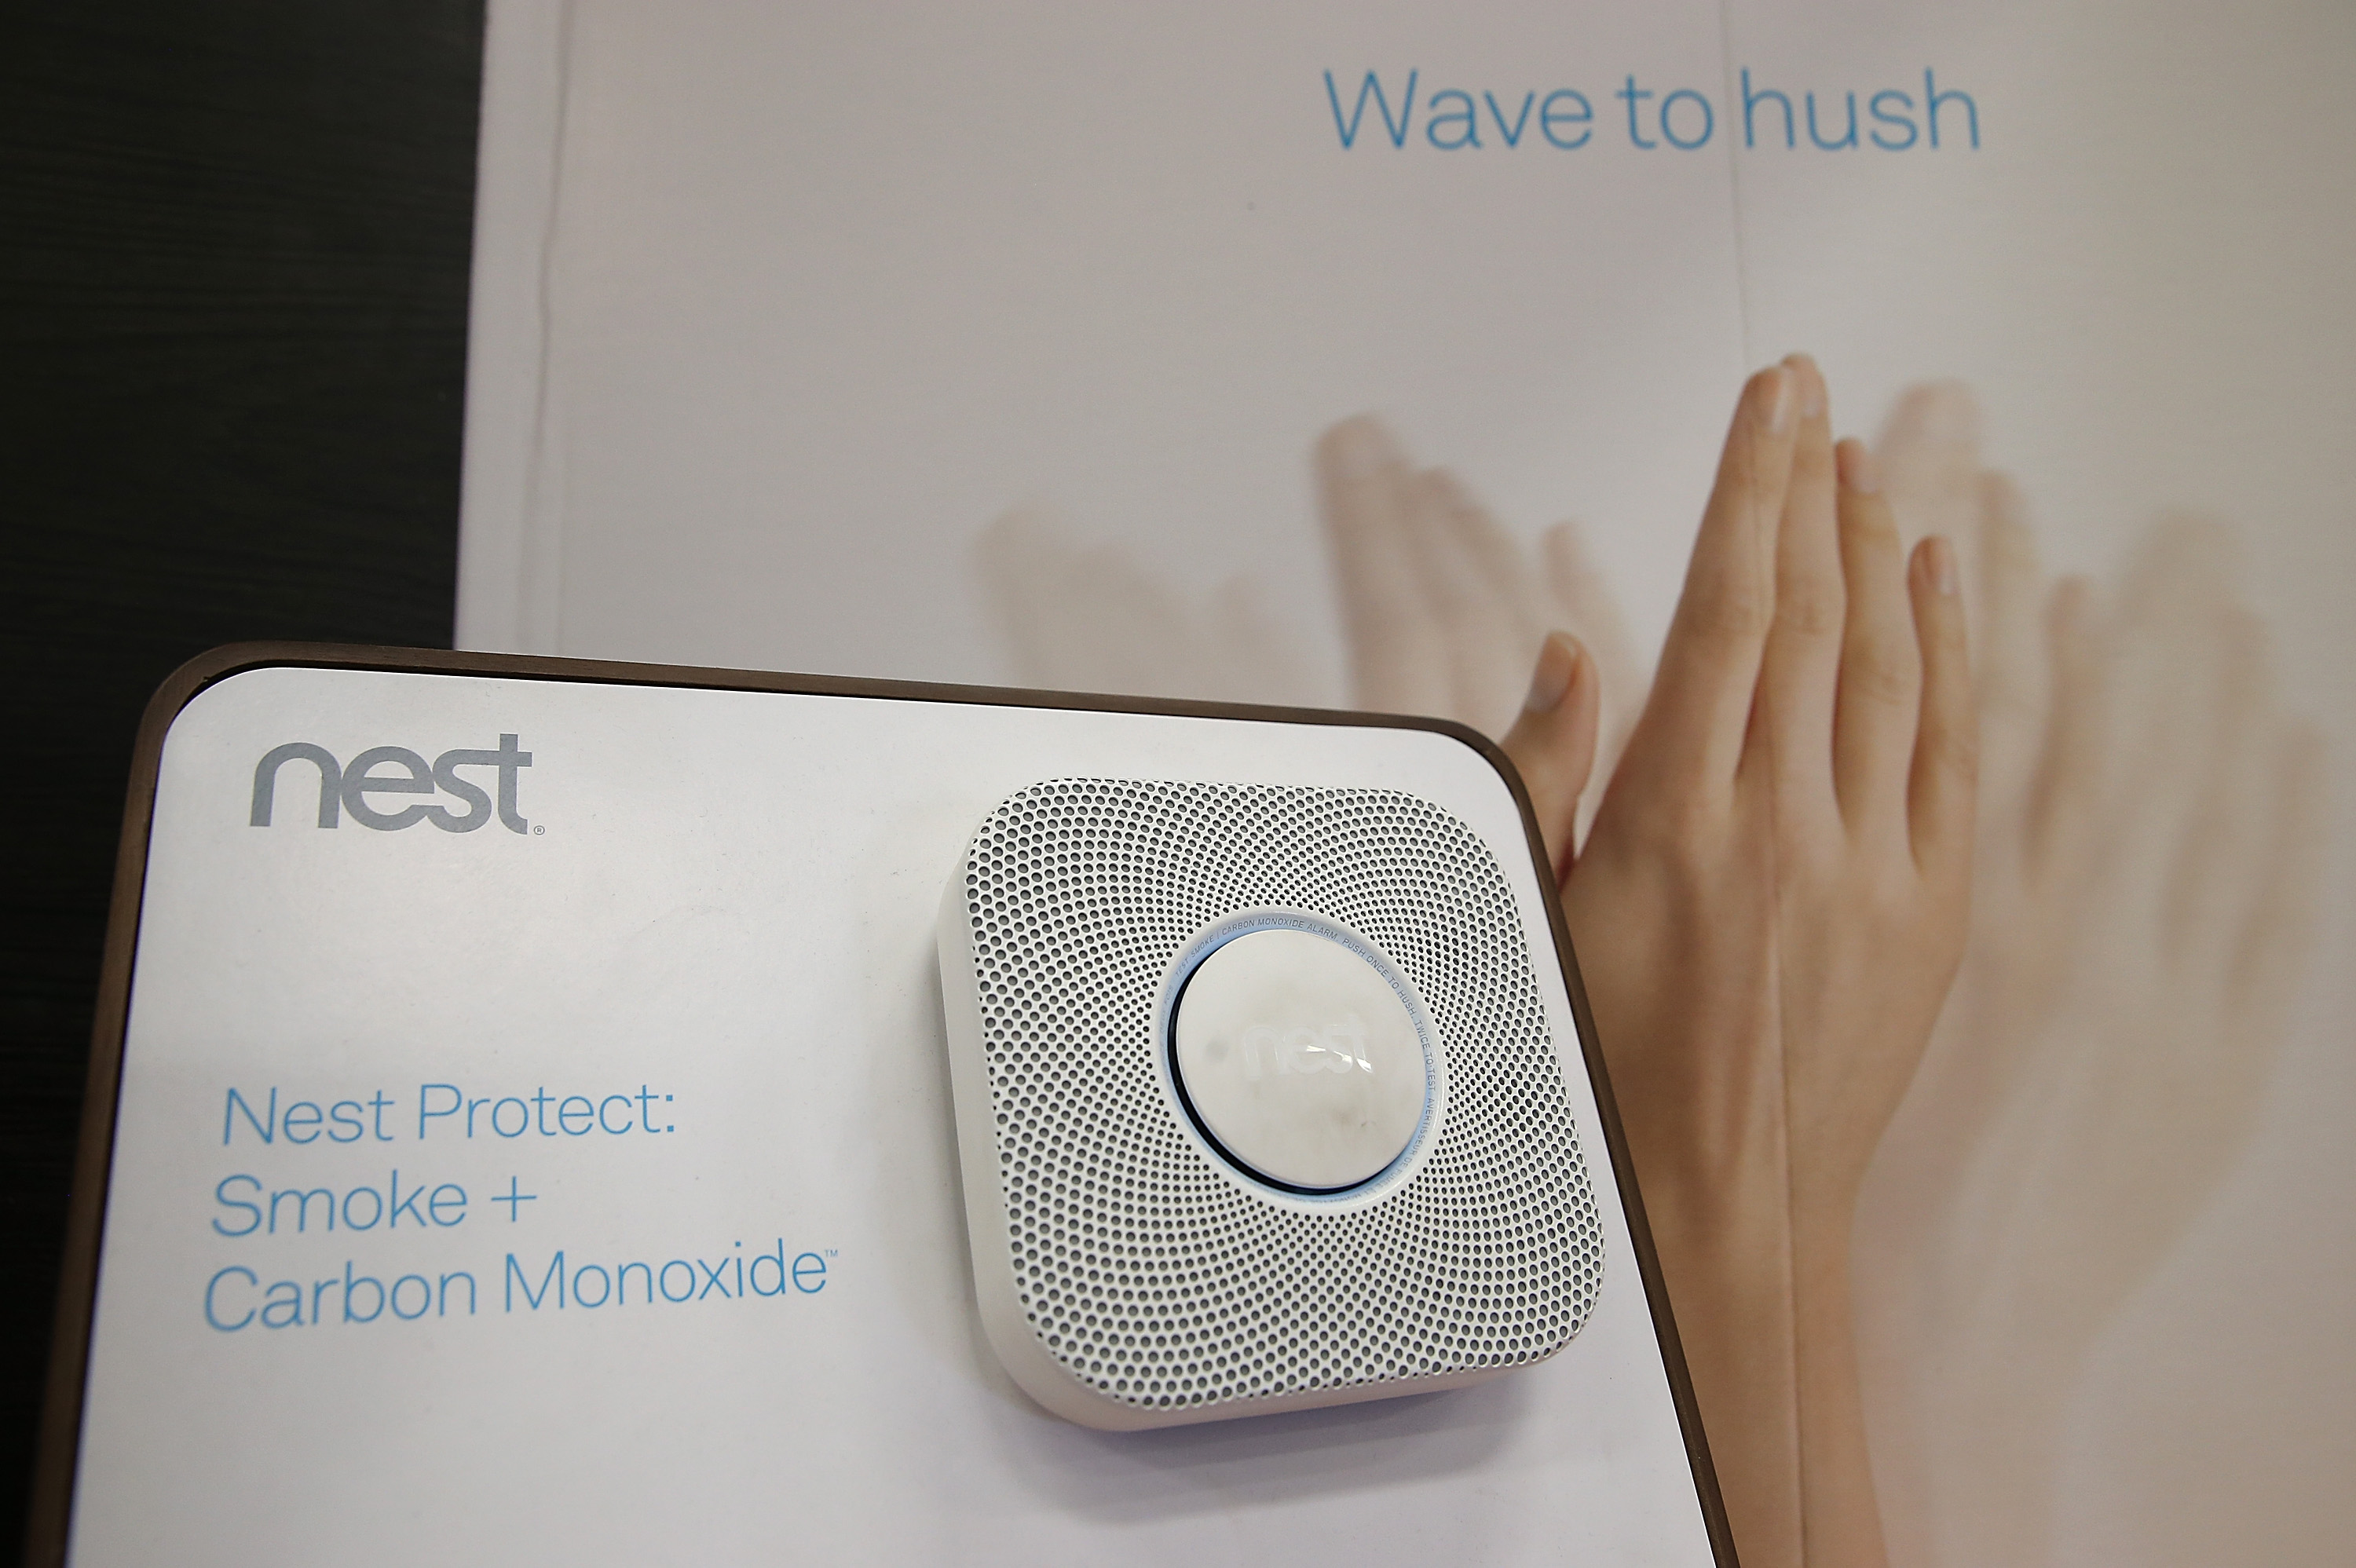 The Nest Protect smoke and carbon monoxide detector is displayed at a Home Depot store on January 13, 2014 in San Rafael, California. (Justin Sullivan—Getty Images)